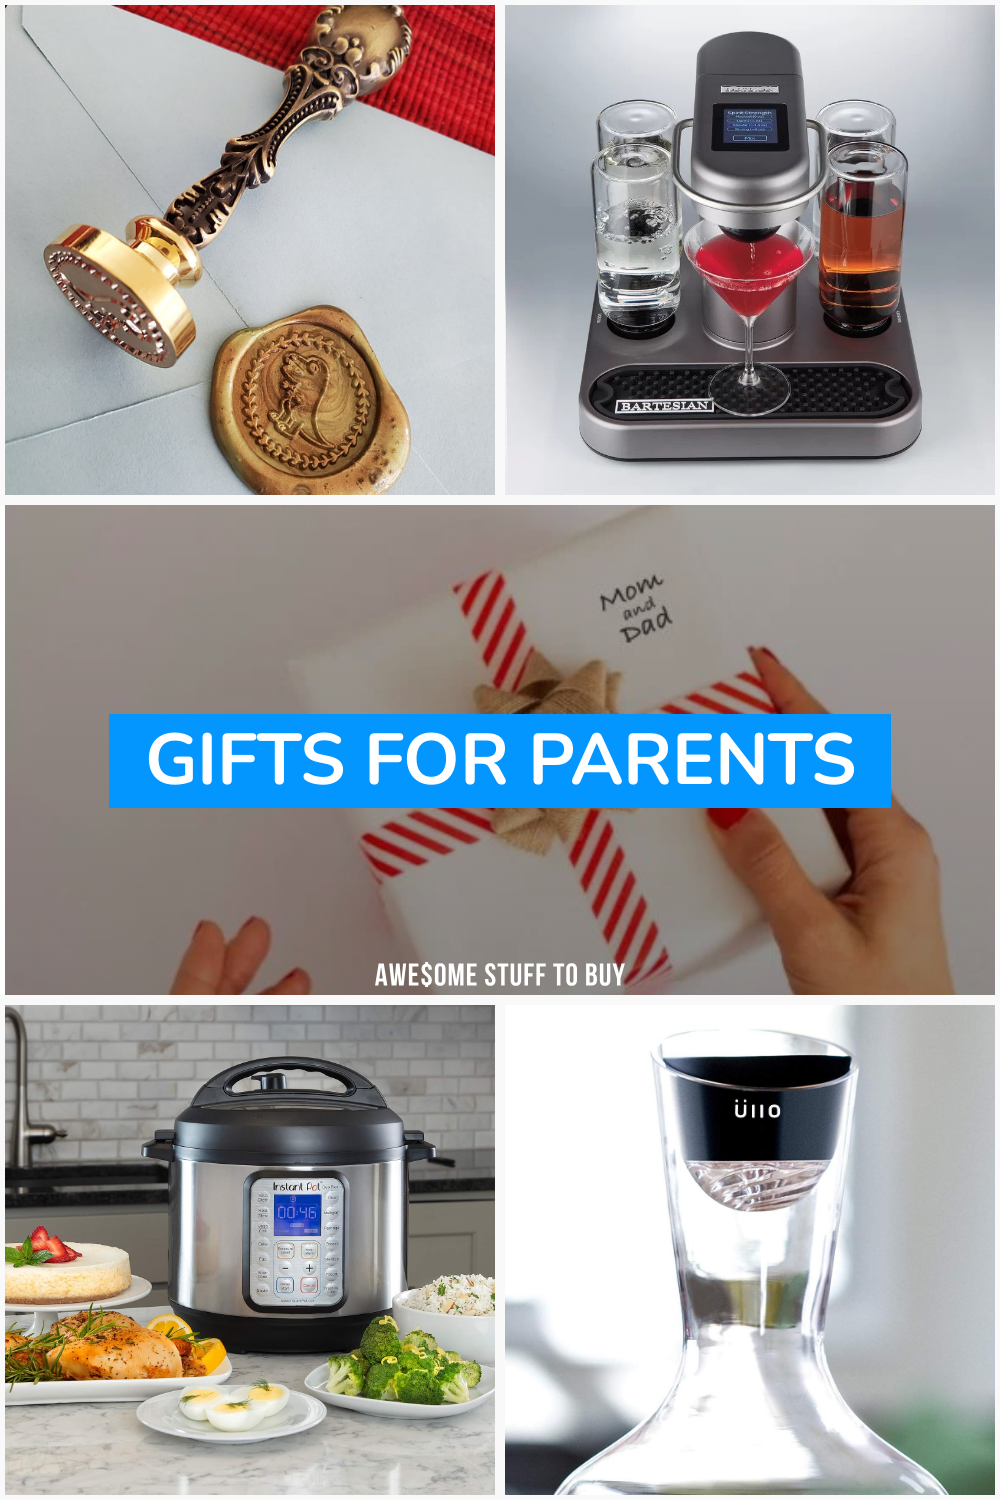 Gifts for Parents // Awesome Stuff to Buy